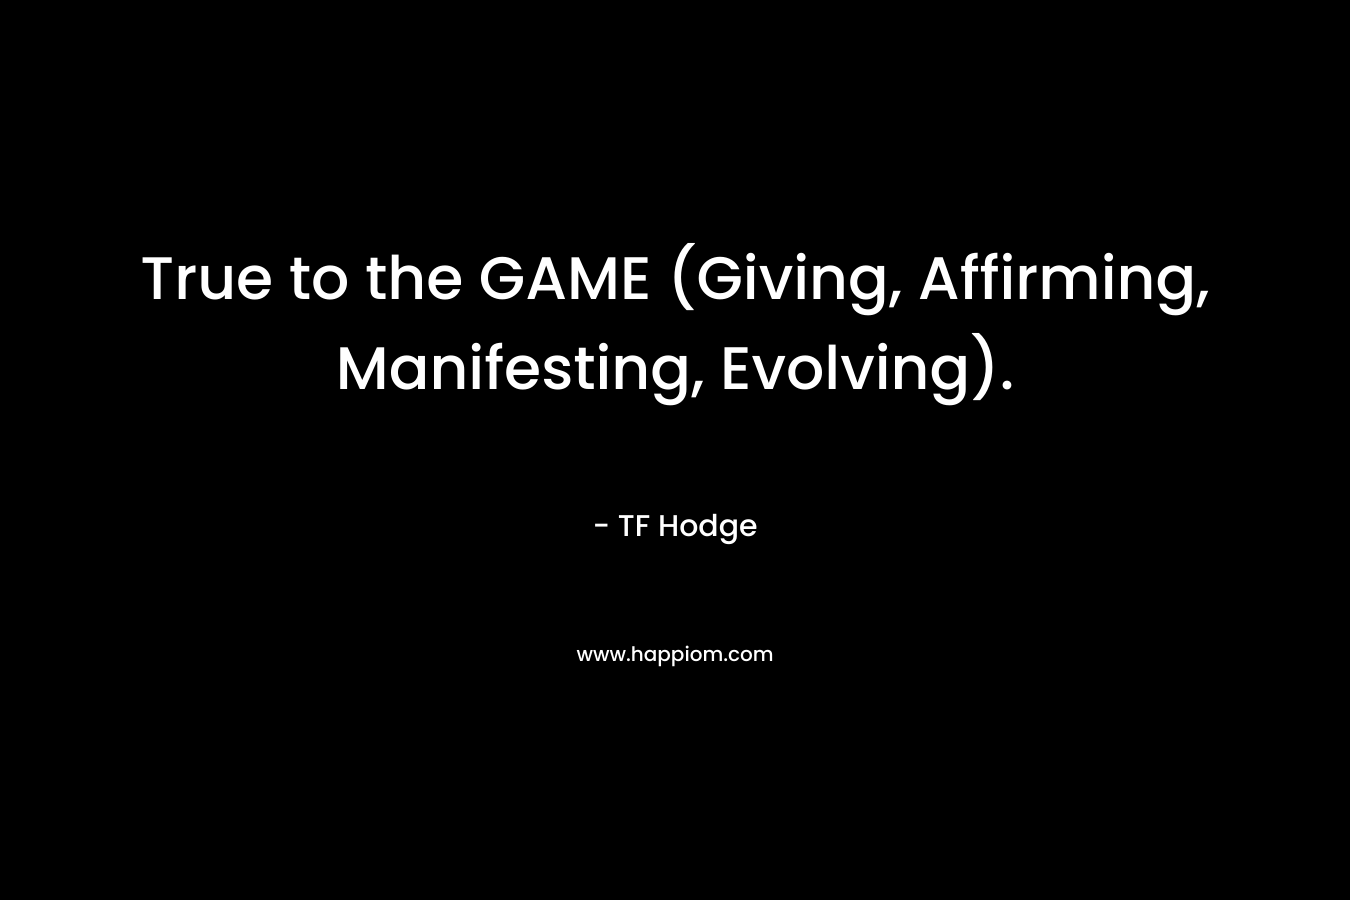 True to the GAME (Giving, Affirming, Manifesting, Evolving). – TF Hodge